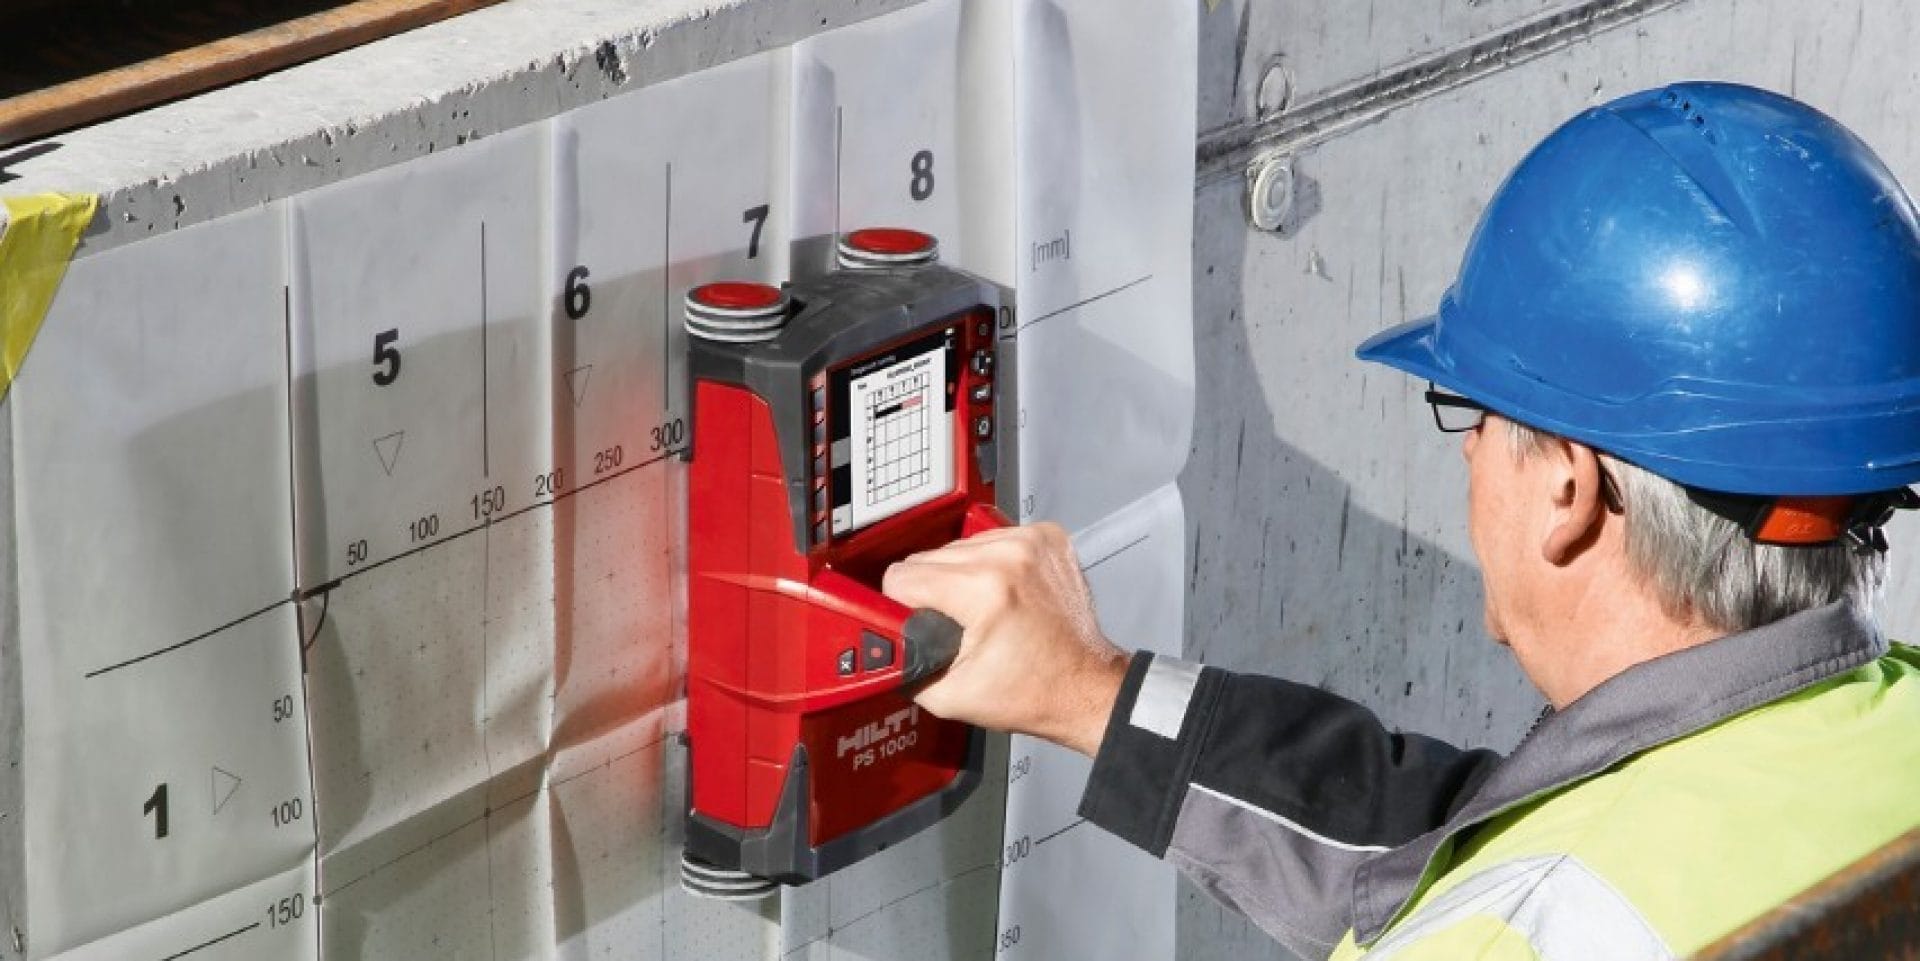 Hilti PS 1000 X-Scan detection system